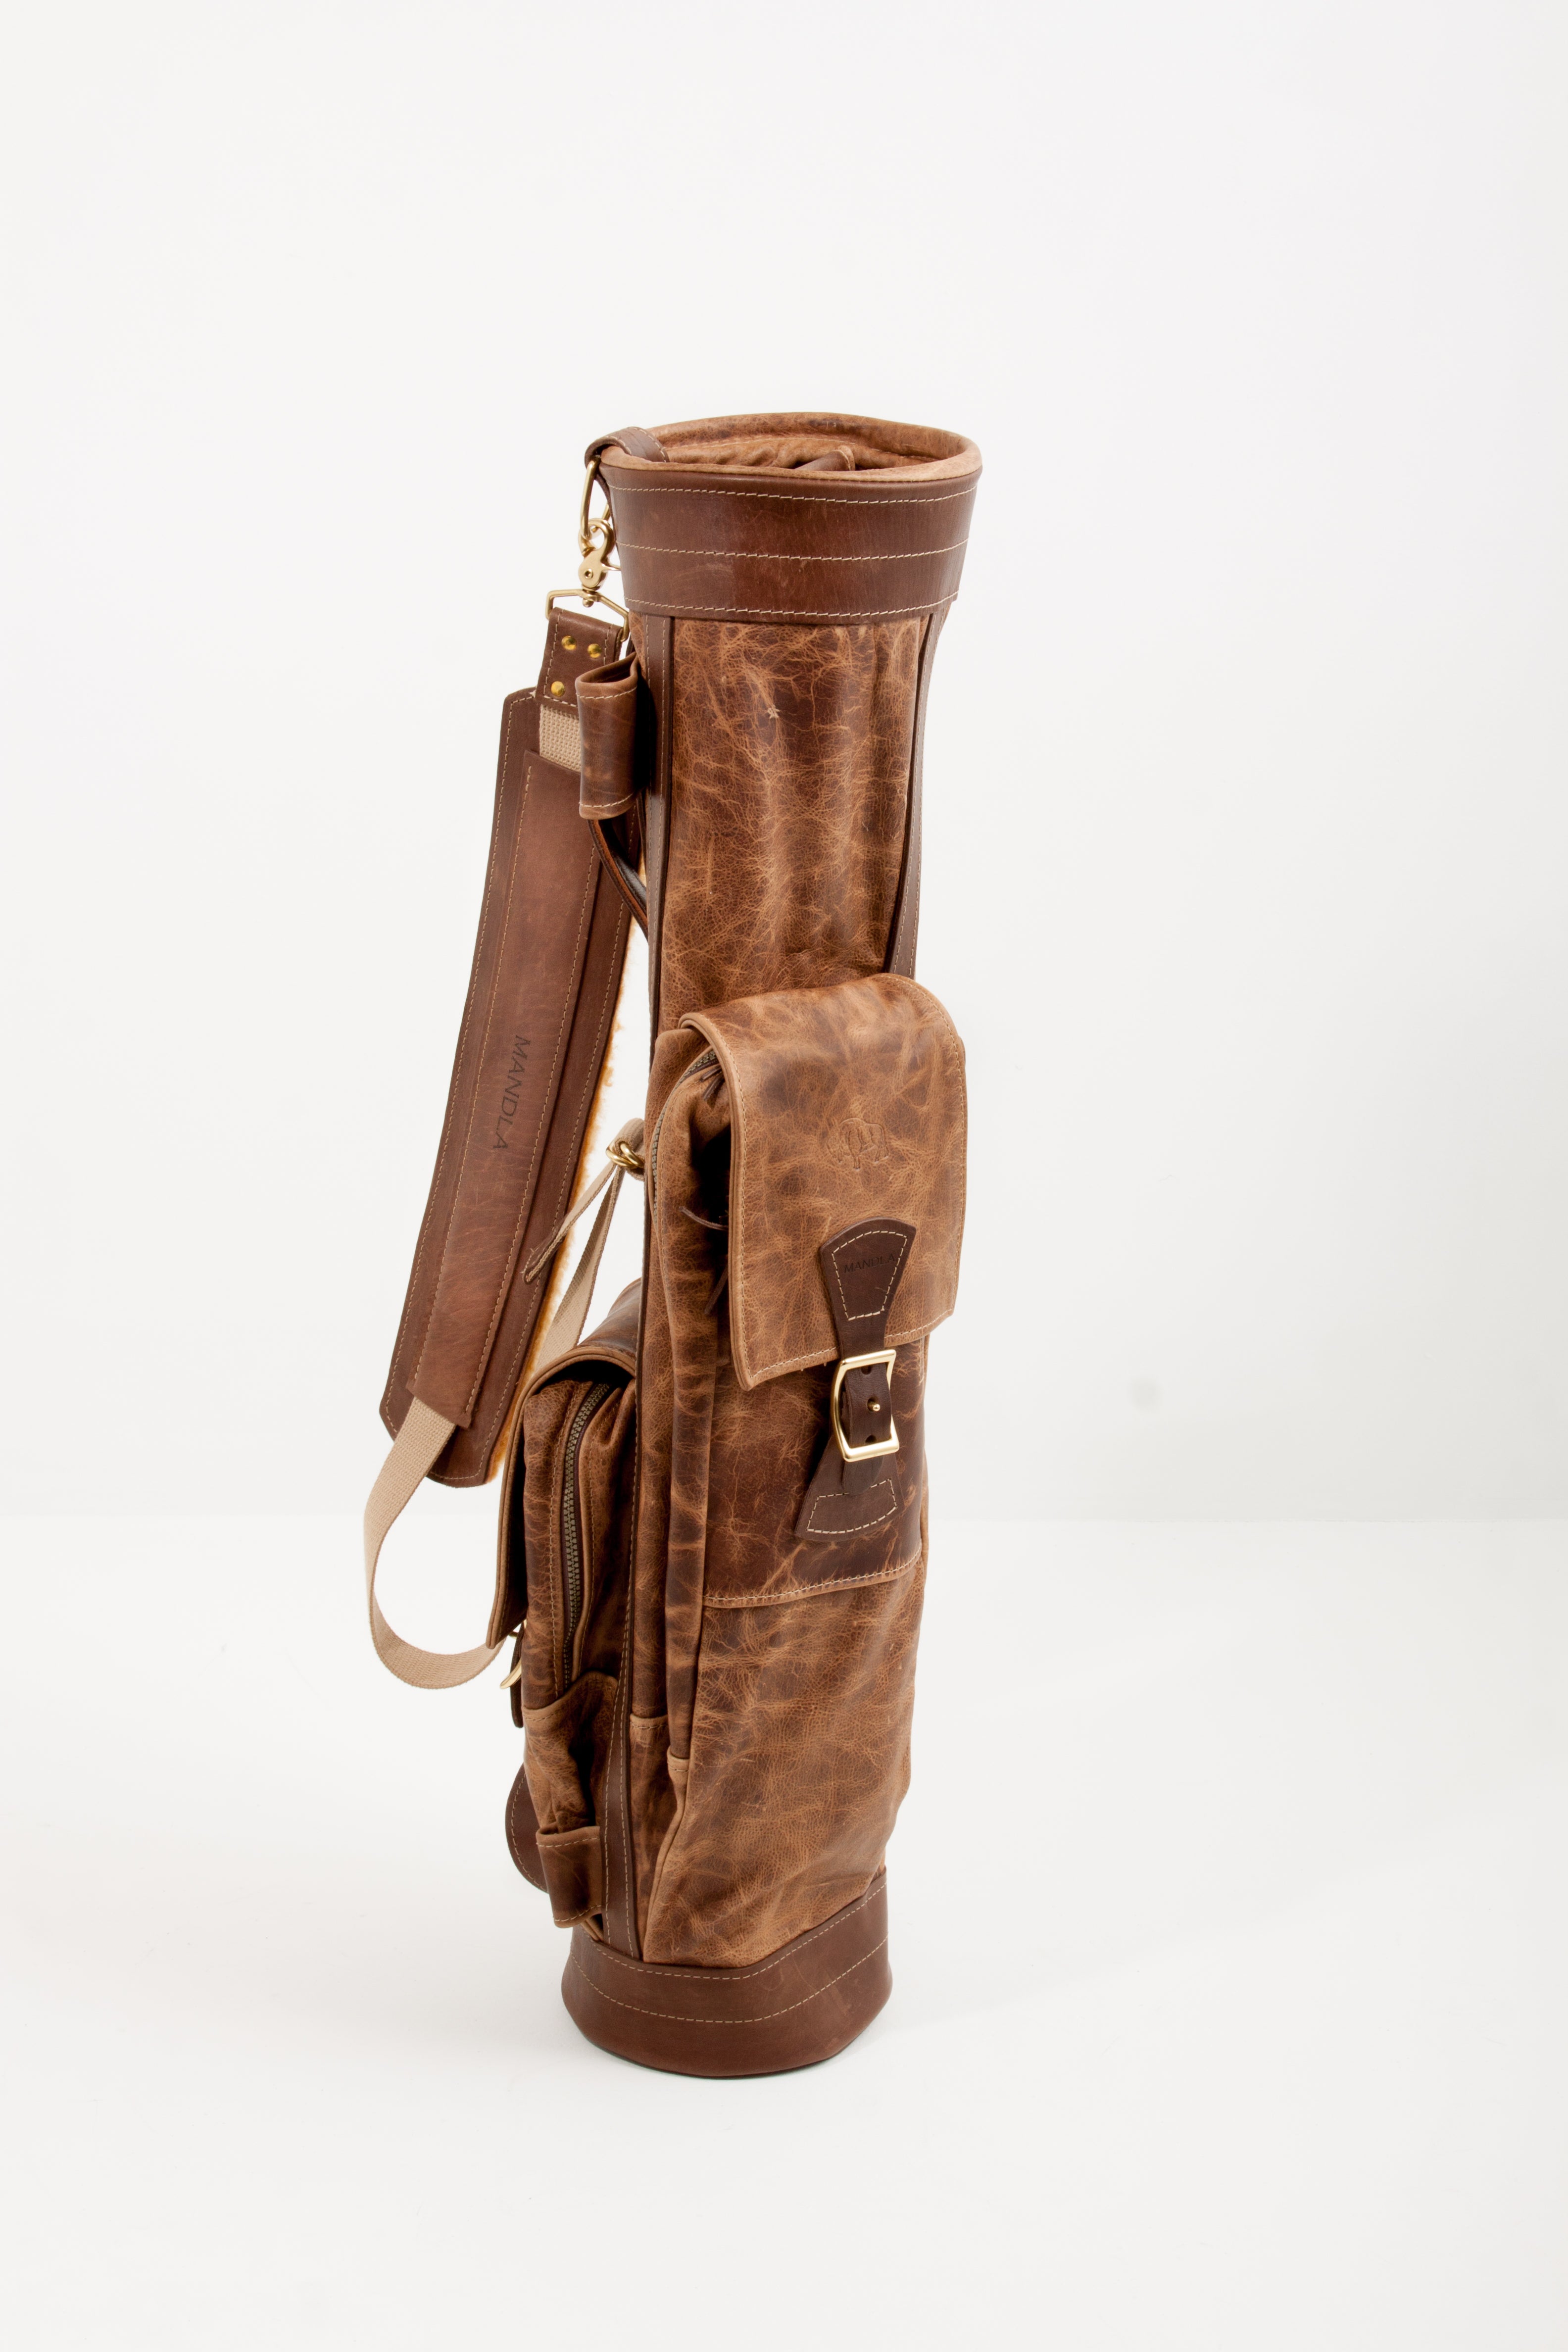 Custom Leather Stand Golf Bag – Ace of Clubs Golf Company